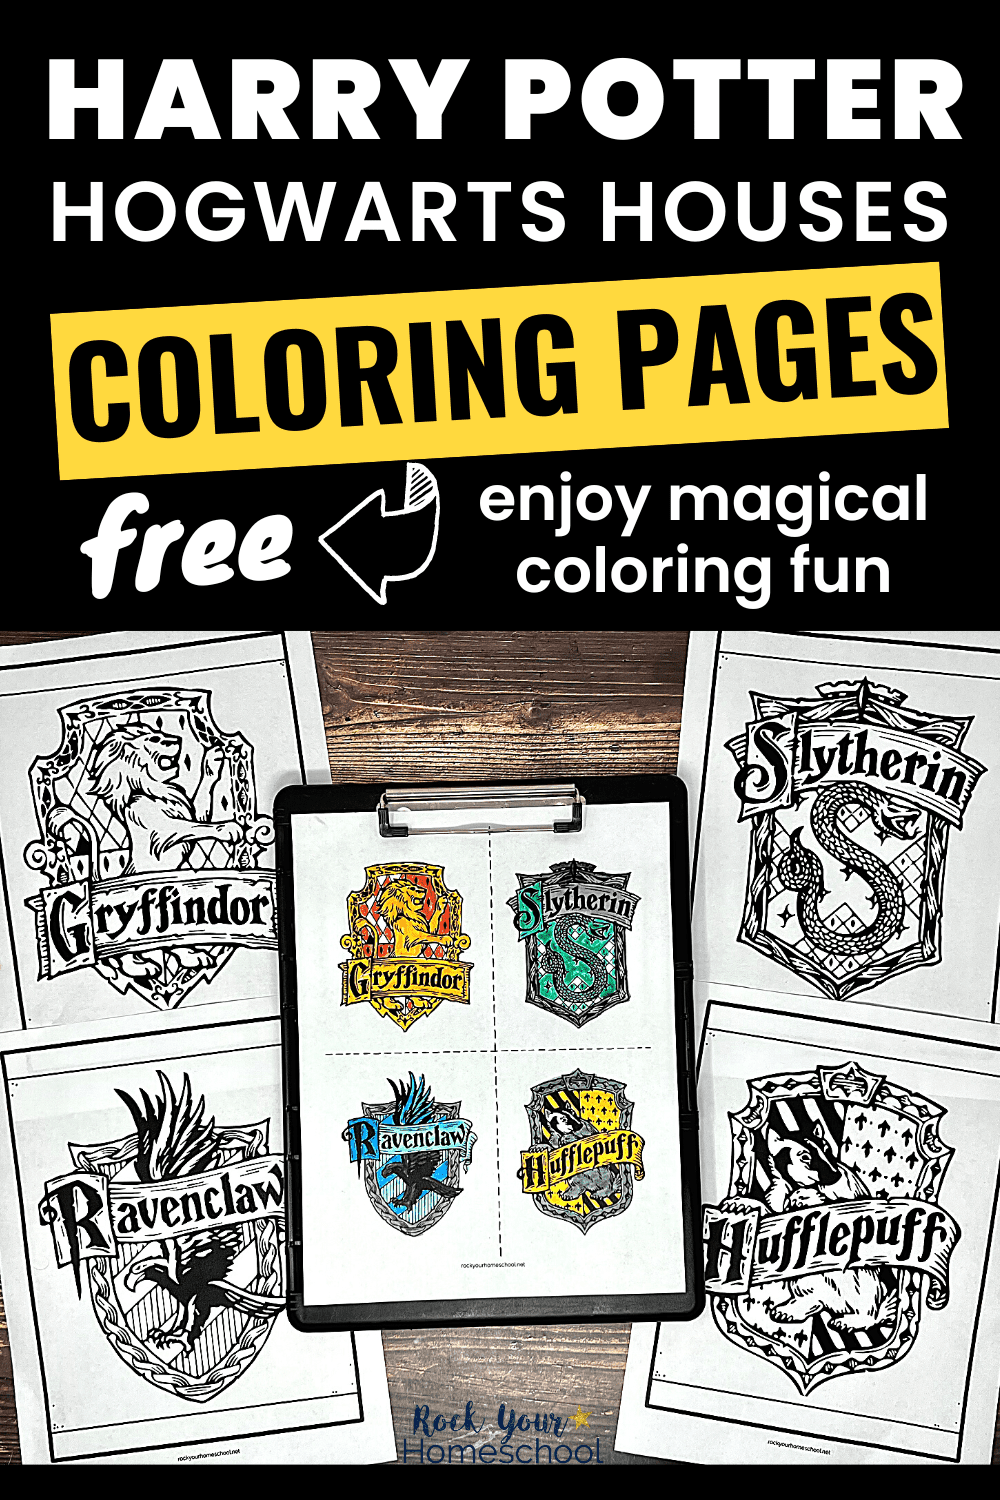 Harry potter houses coloring pages for magical fun free